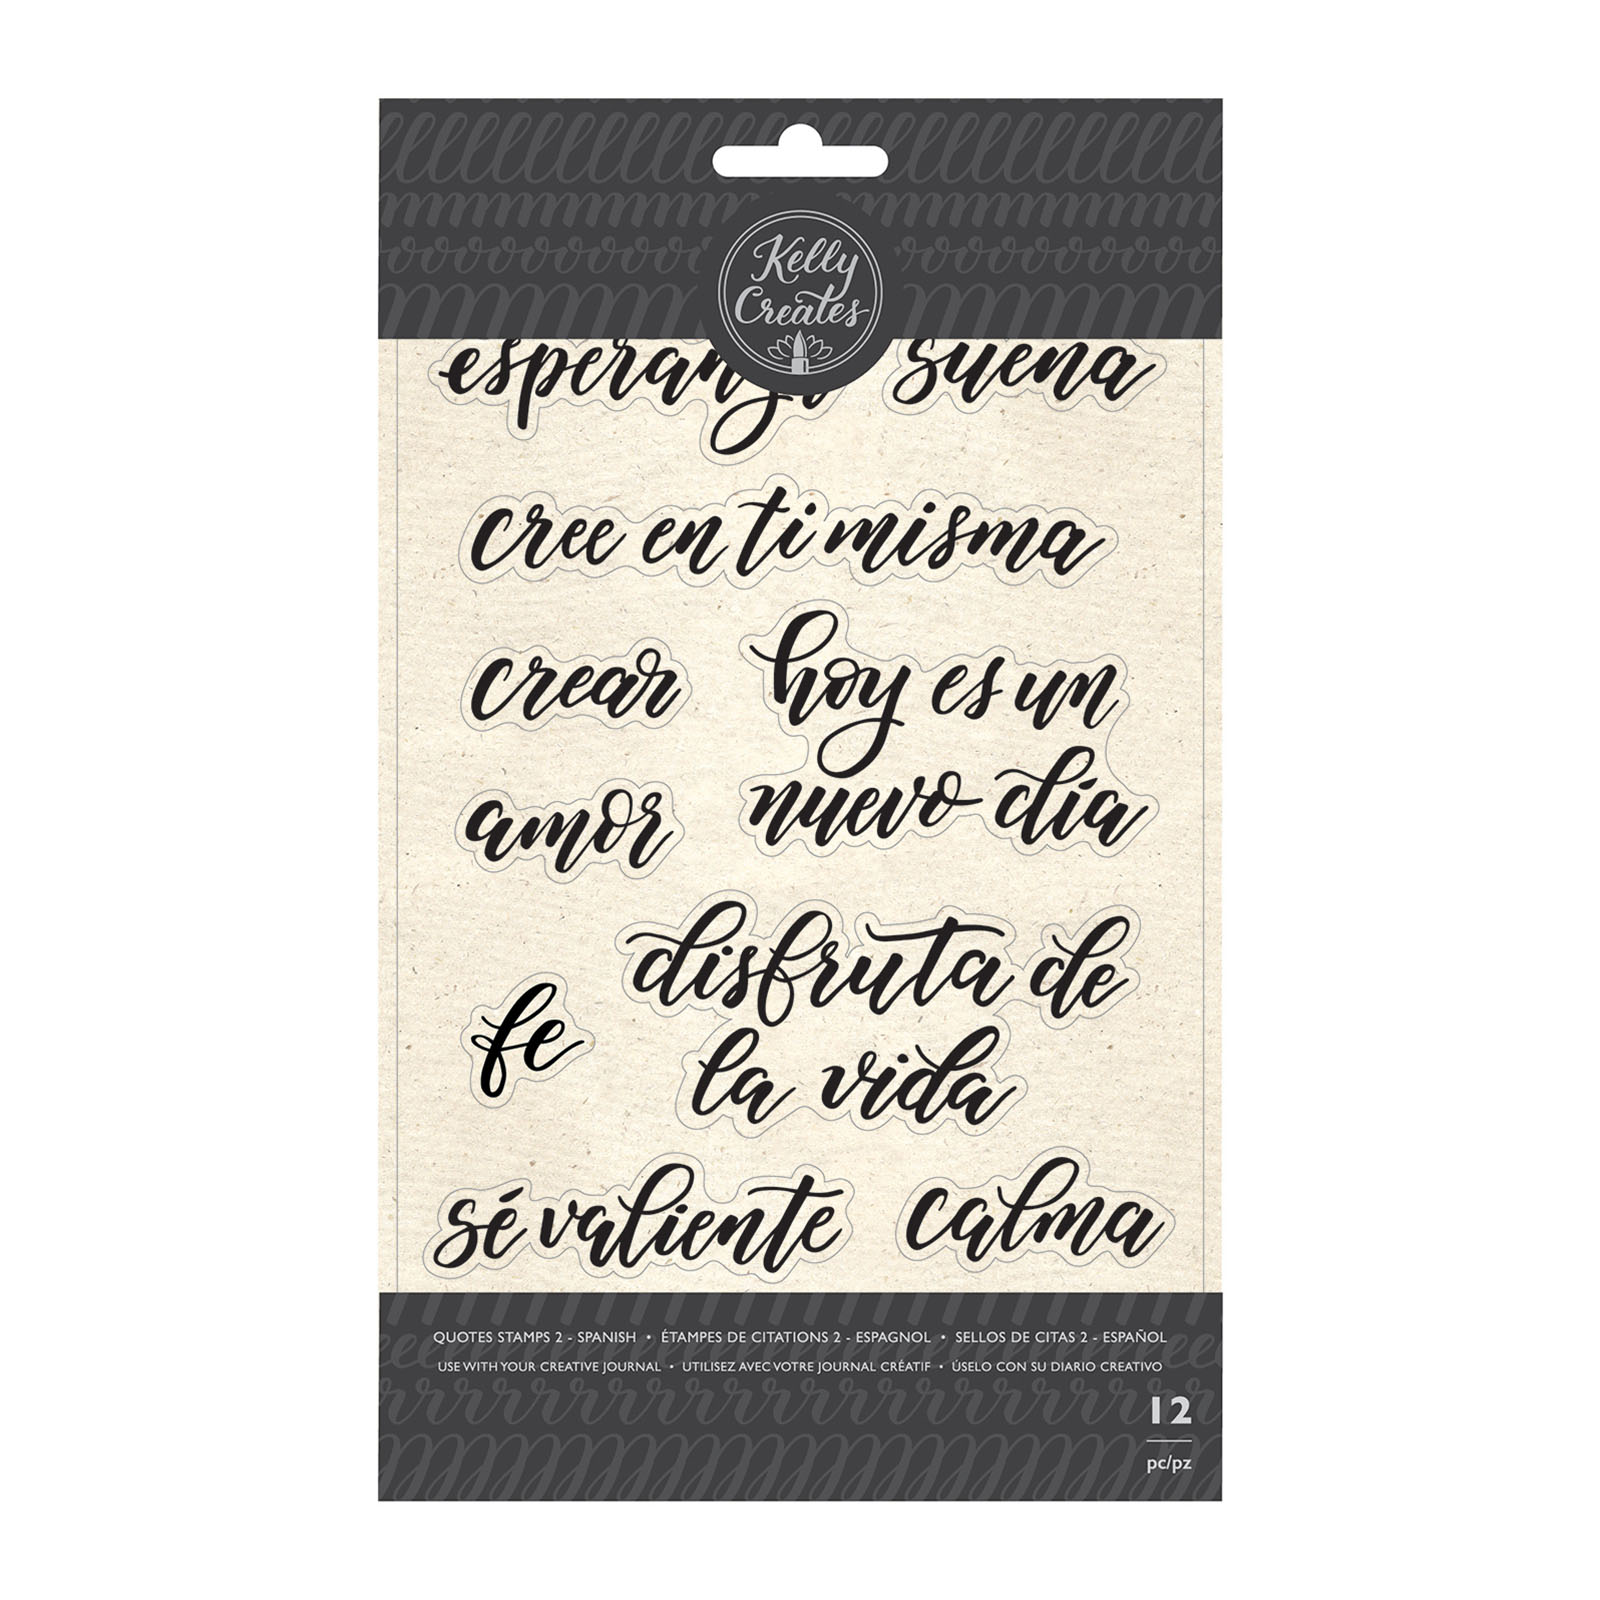 Kelly Creates • Traceable stamp quotes 2 spanish 12pc